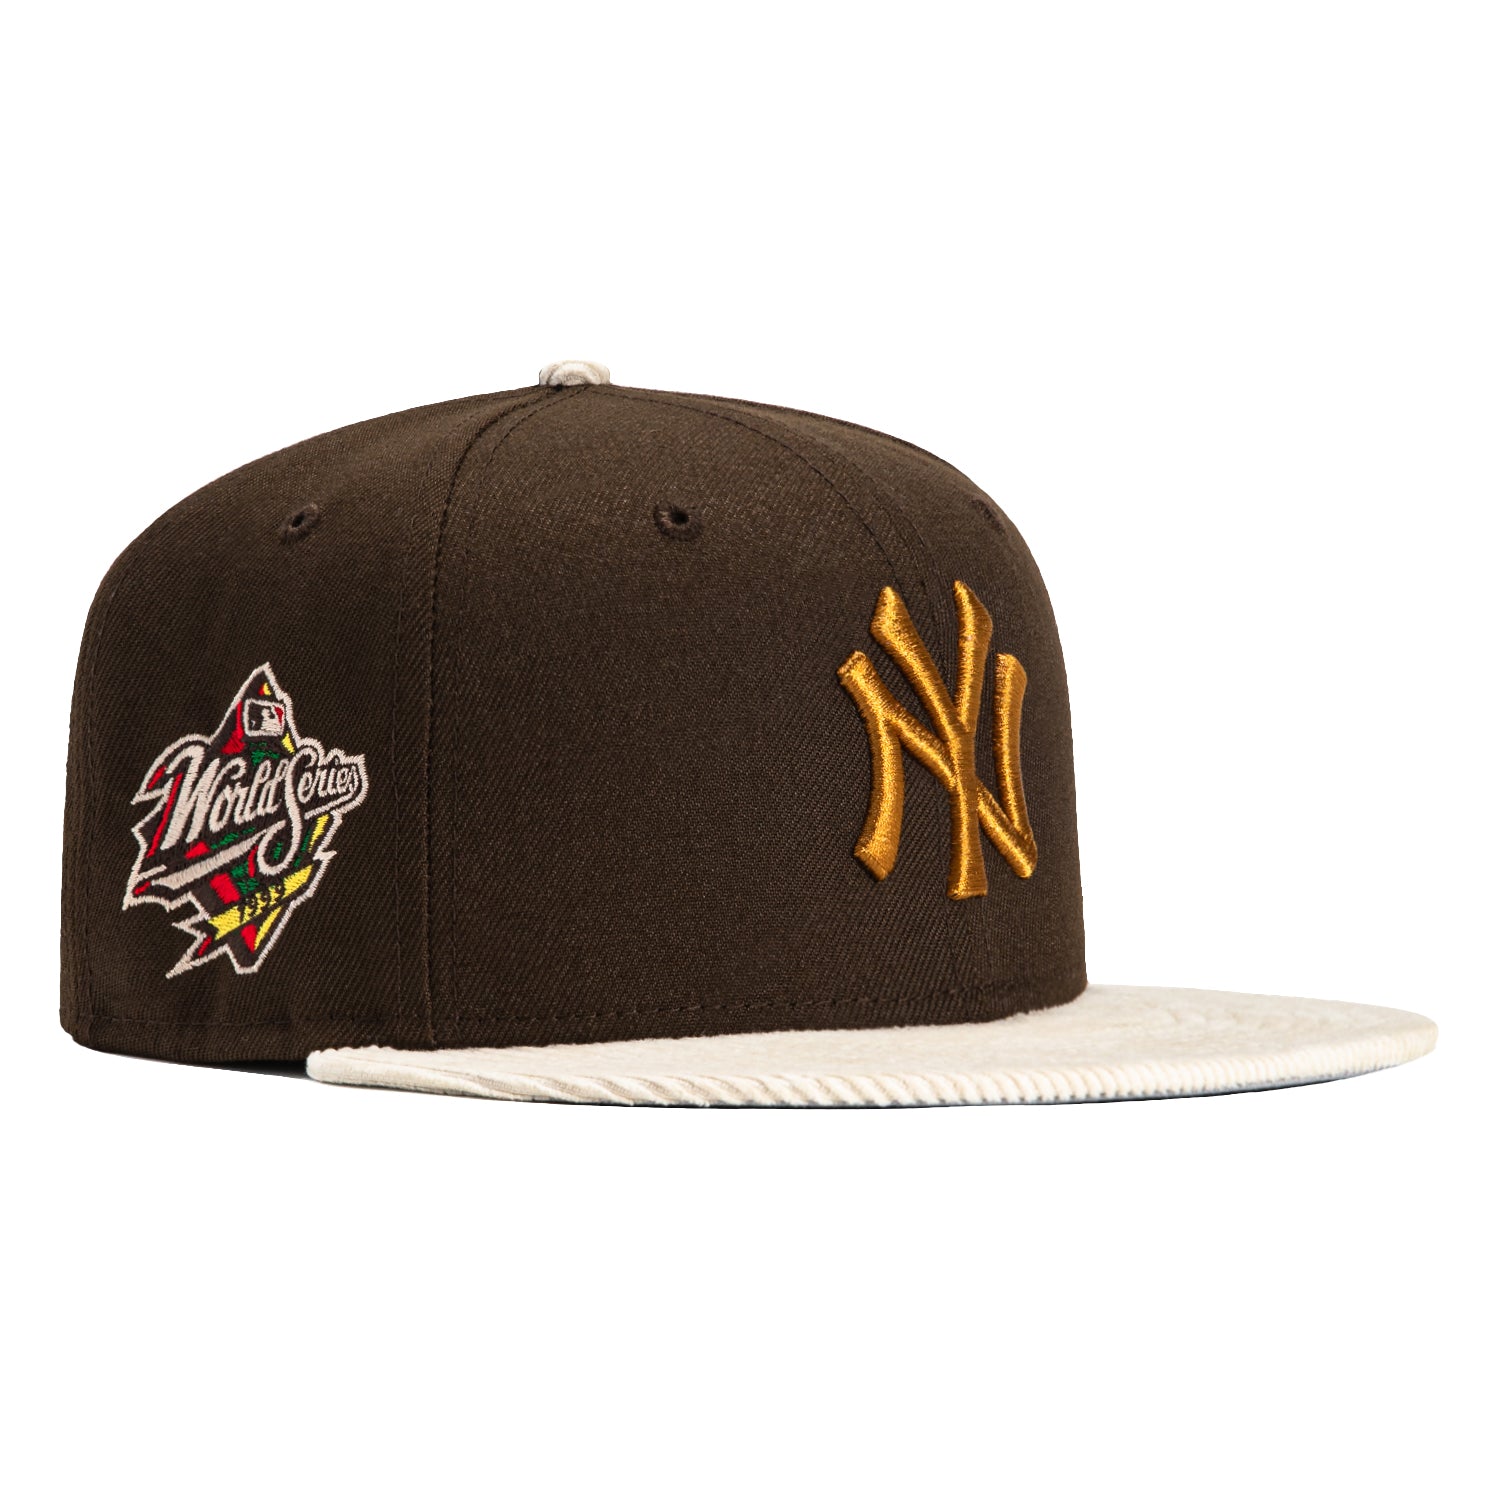 New Era 59Fifty NEW YORK YANKEES Fitted Hat Brown CREAM UV NEW